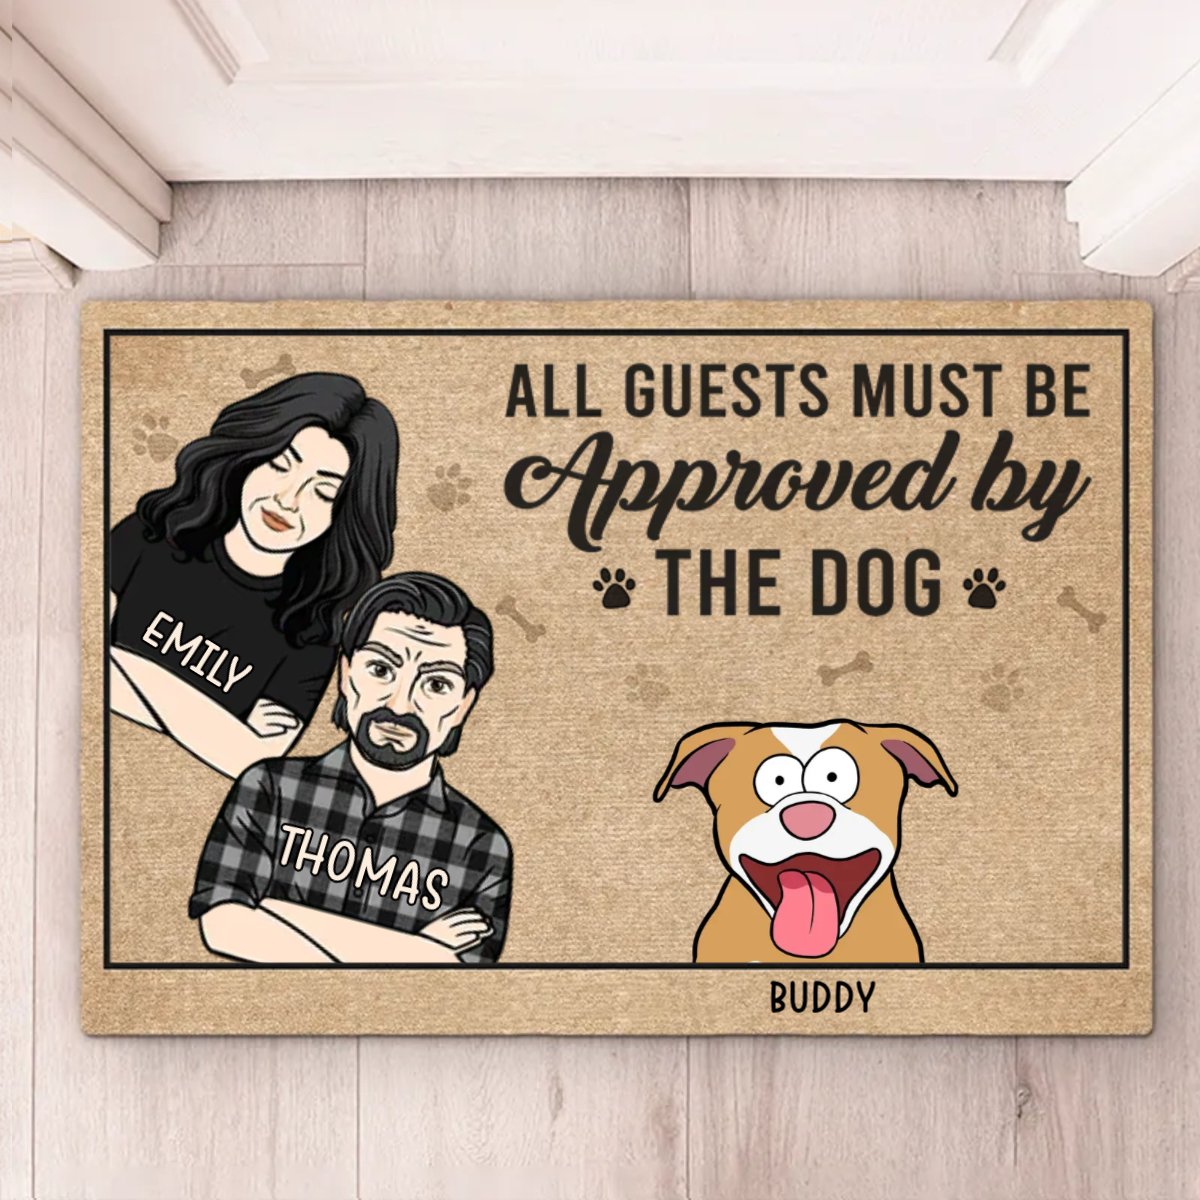 Dog Lovers - The Dog Rules This House - Personalized Home Decor Decorative Mat - The Next Custom Gift